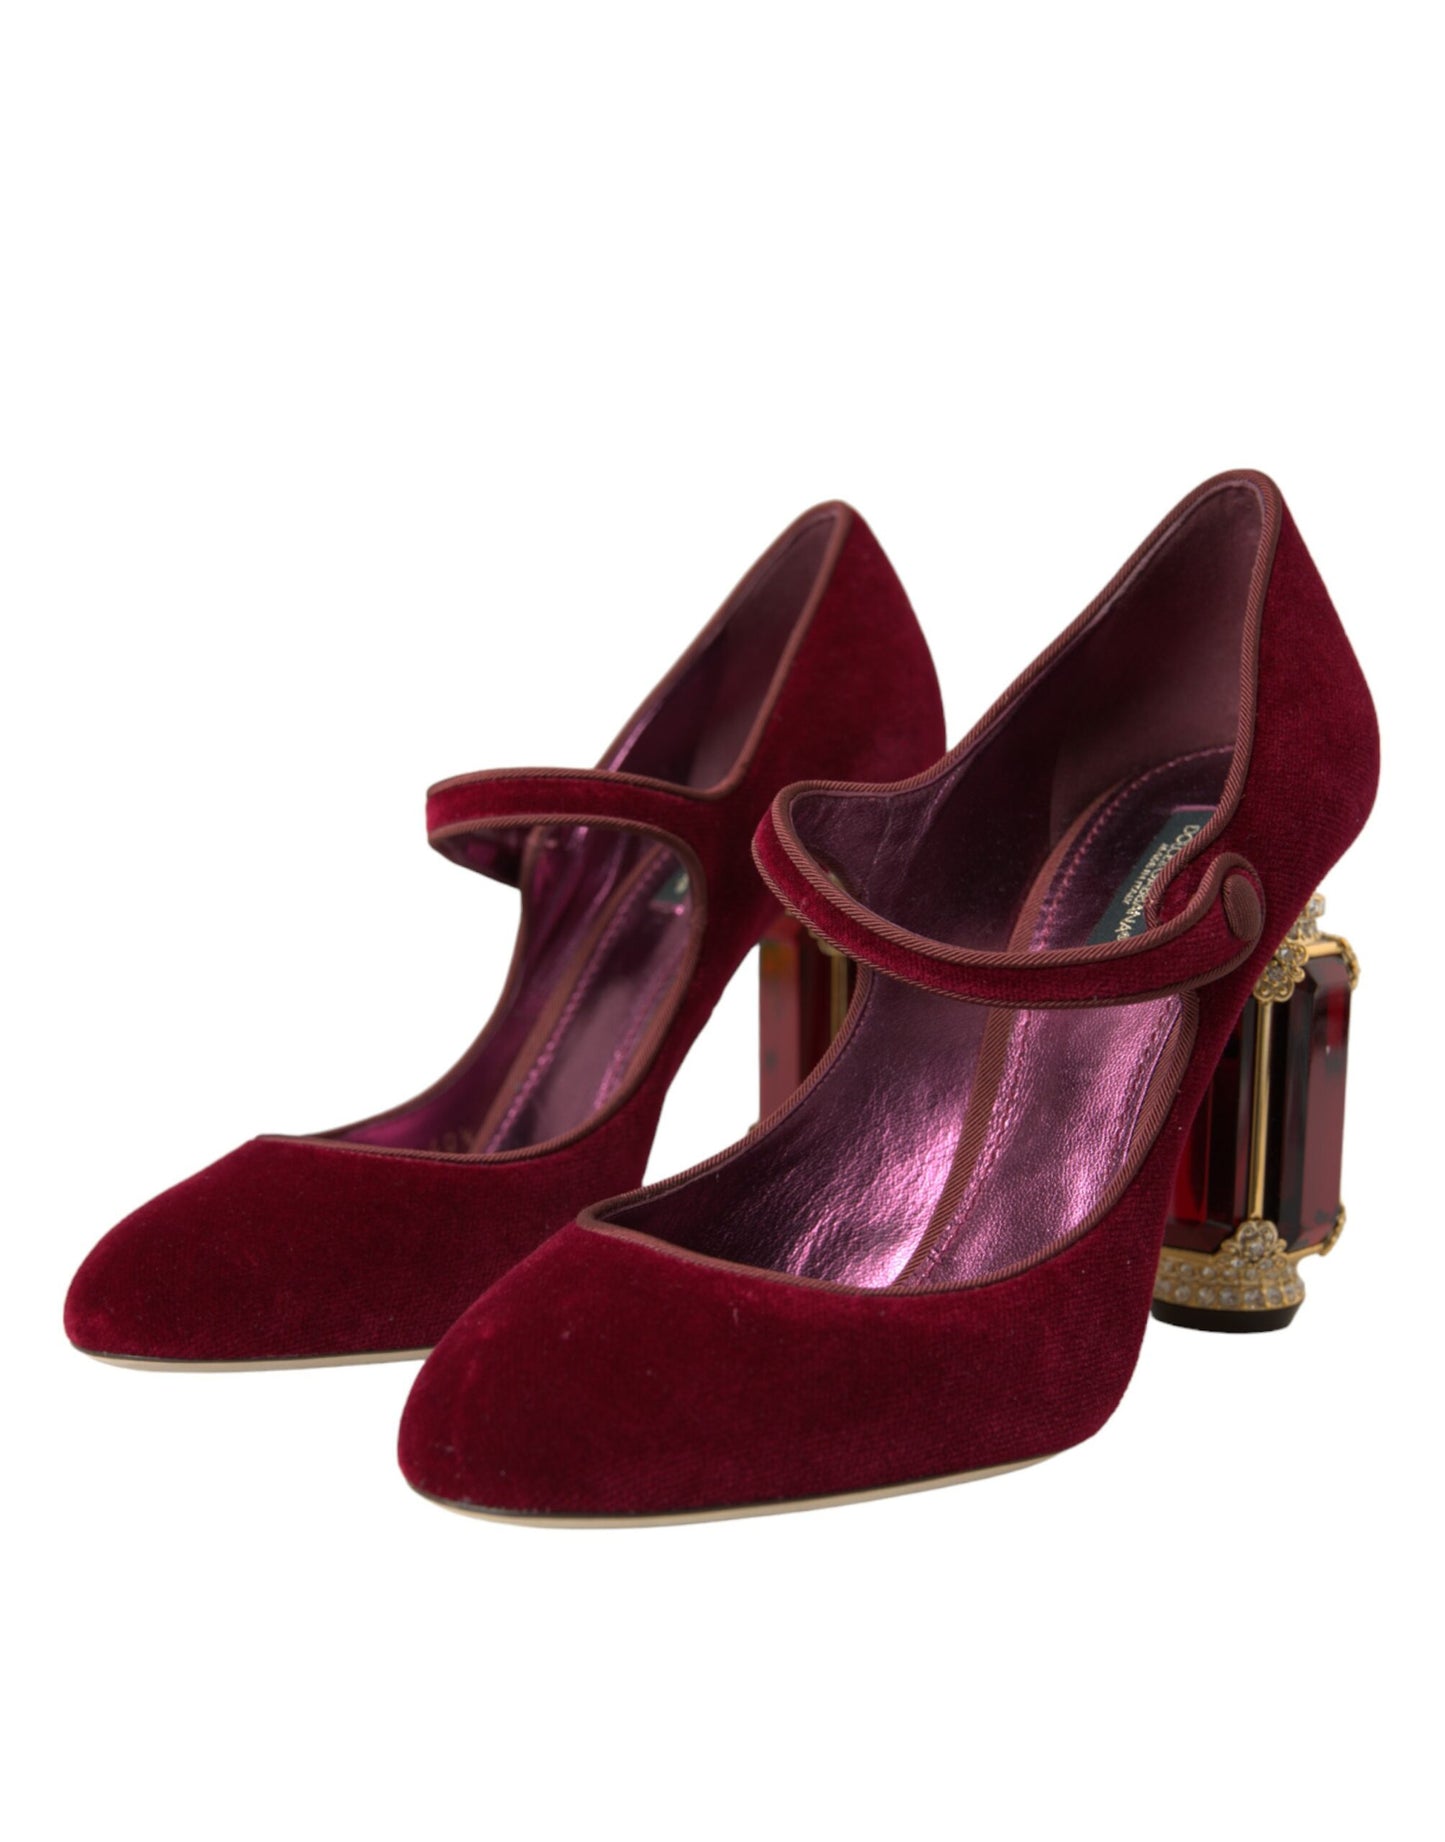 Dolce & Gabbana Red Velvet Gold Crystals Heels Mary Jane Shoes